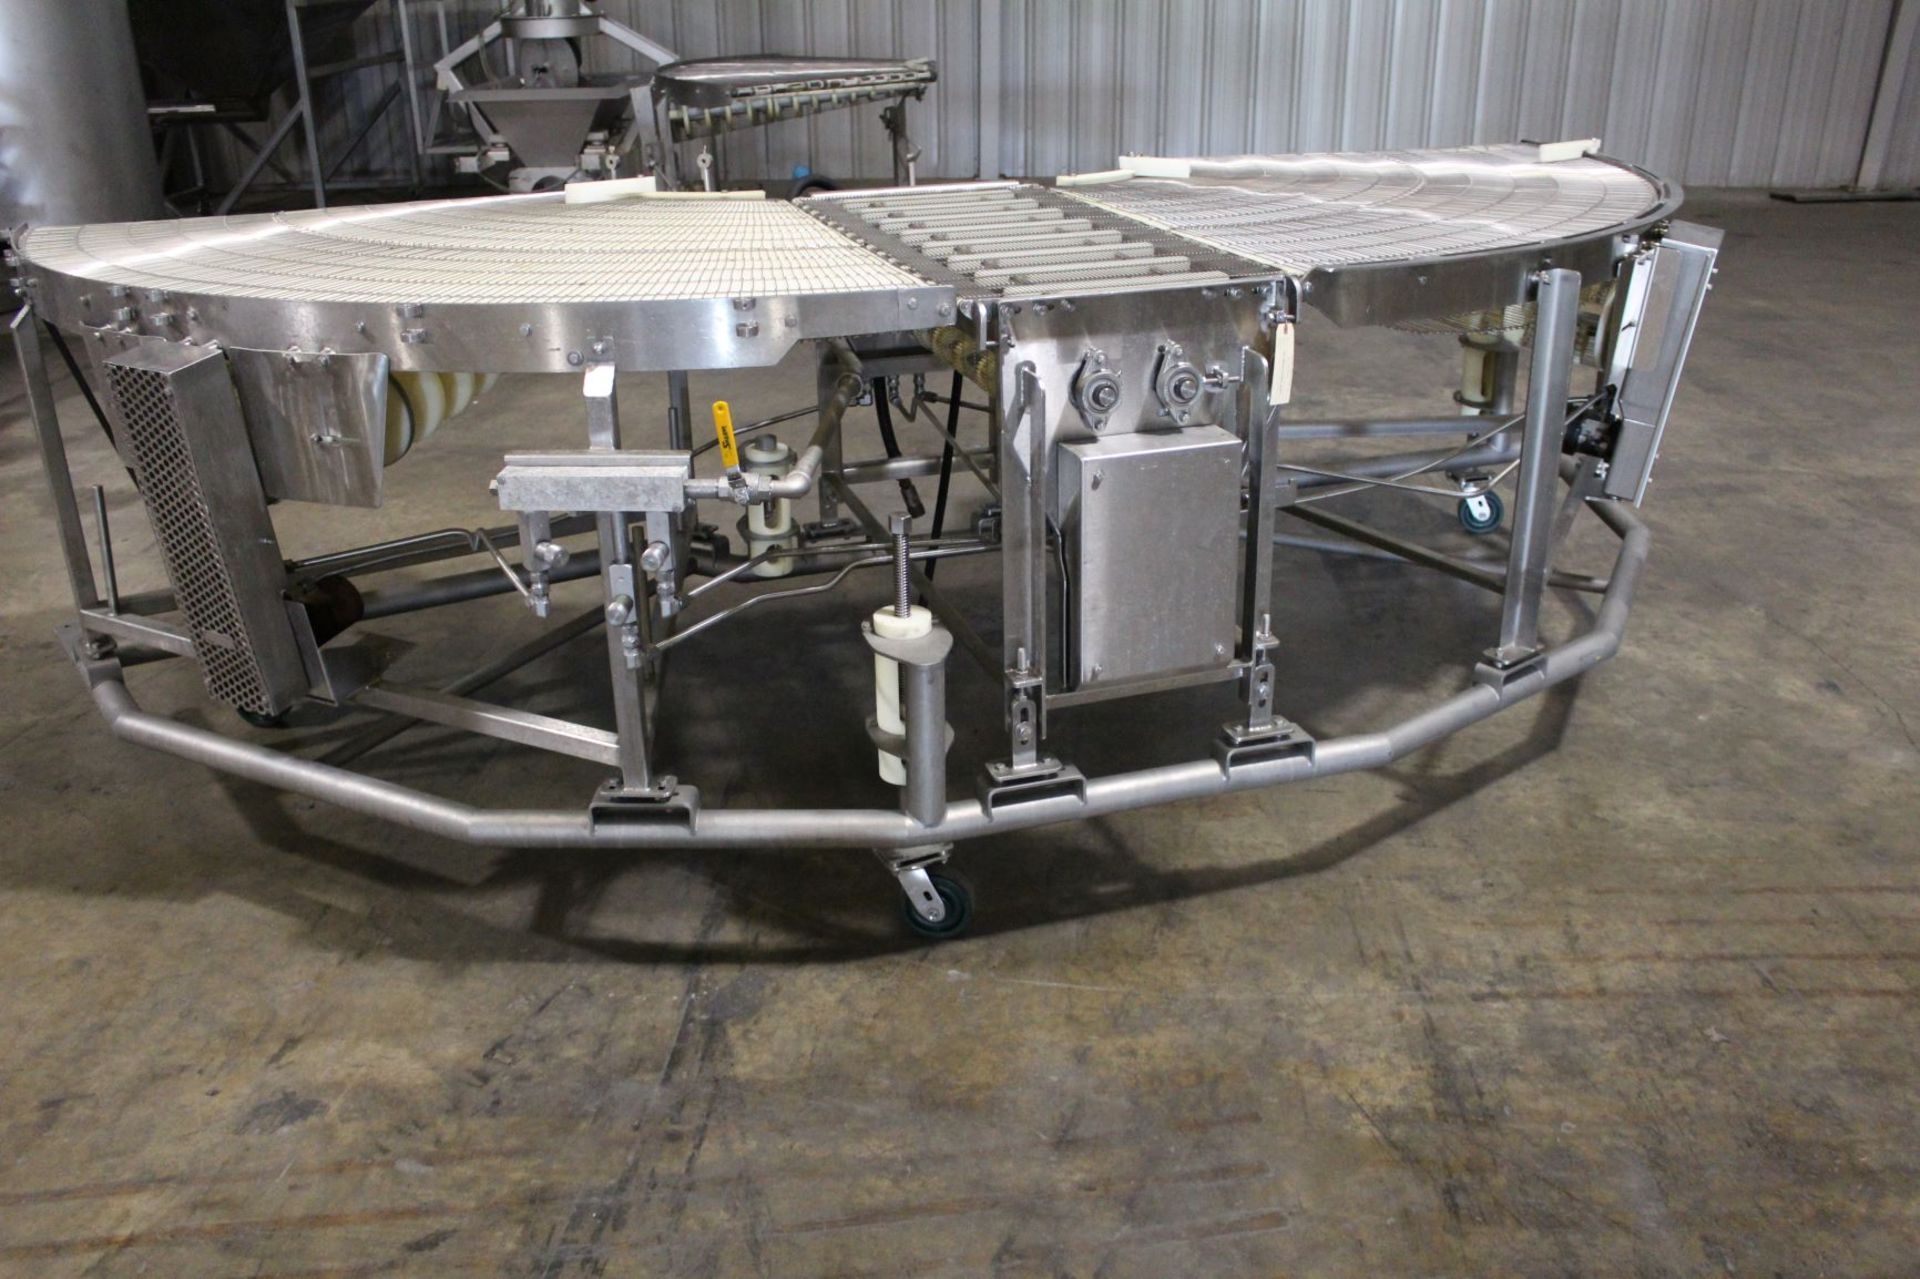 42" 180 Conveyor System, Item# mtl42180consys-2, Located in: Gainsville, GA - Image 2 of 7